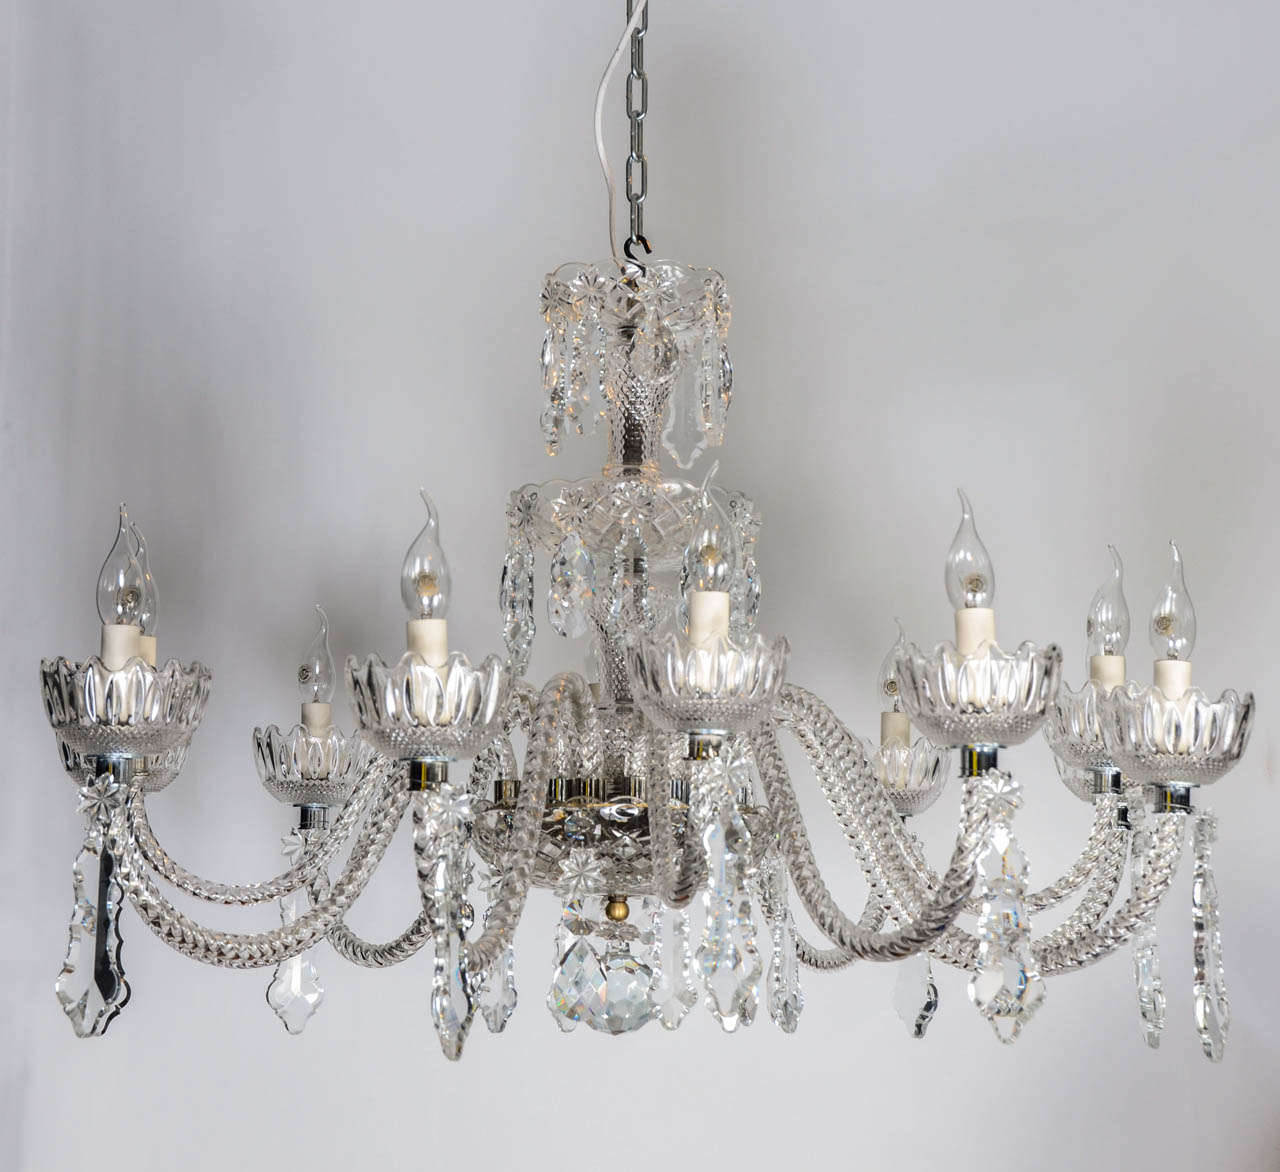 A very elegant 12 lights chandelier.
This chandelier could be fitted with  E10 sockets at no extra charge.